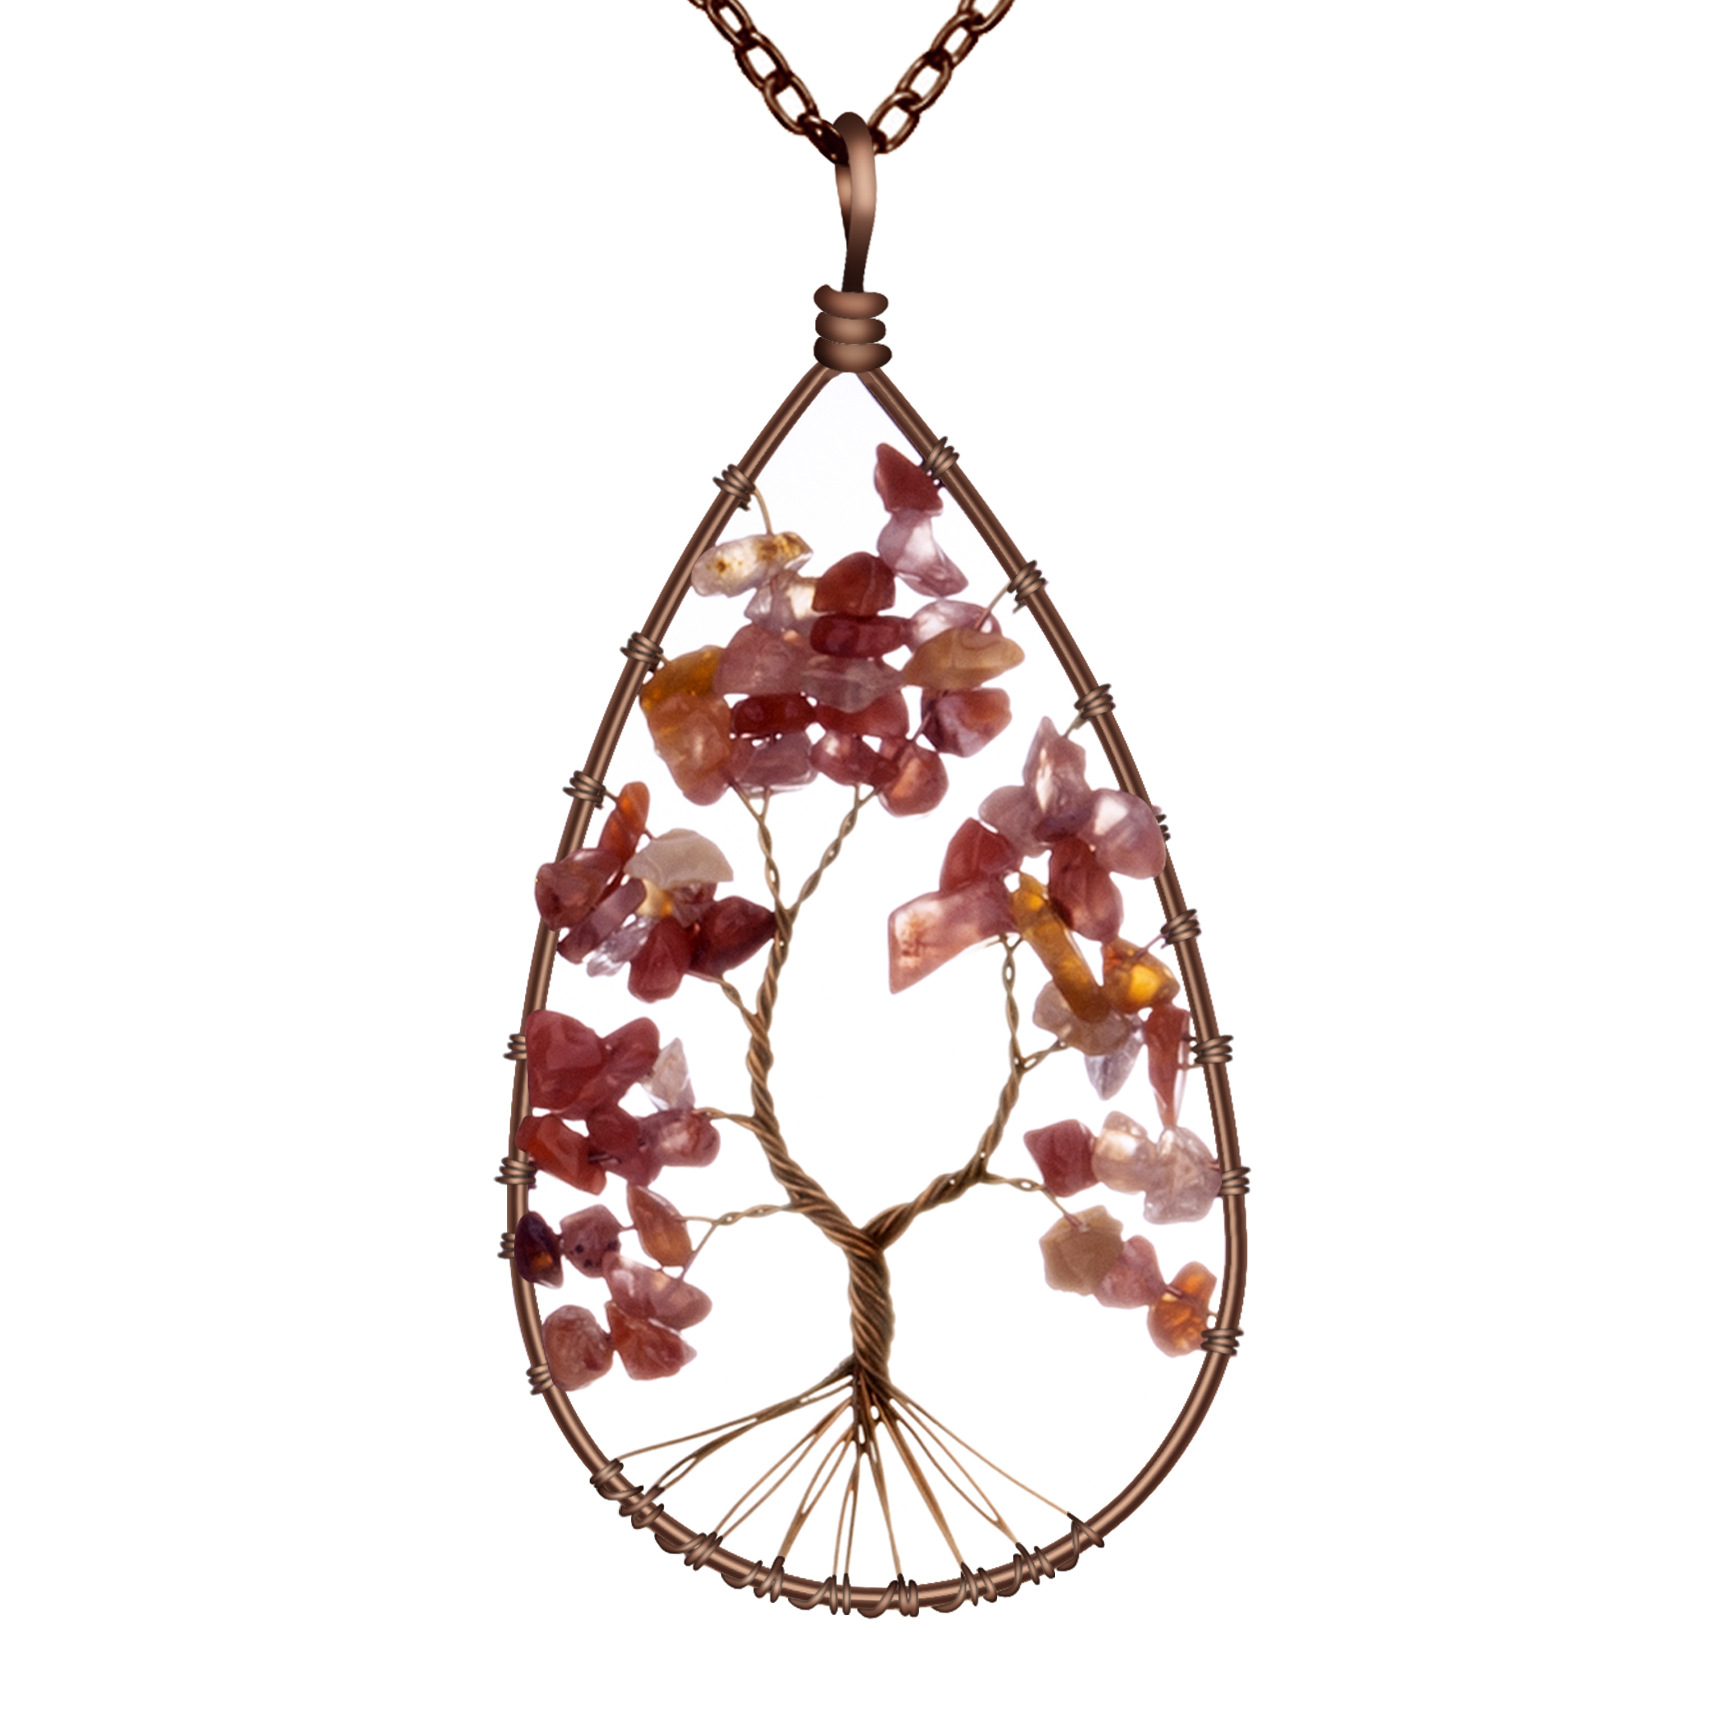 Red Agate レッドアゲート